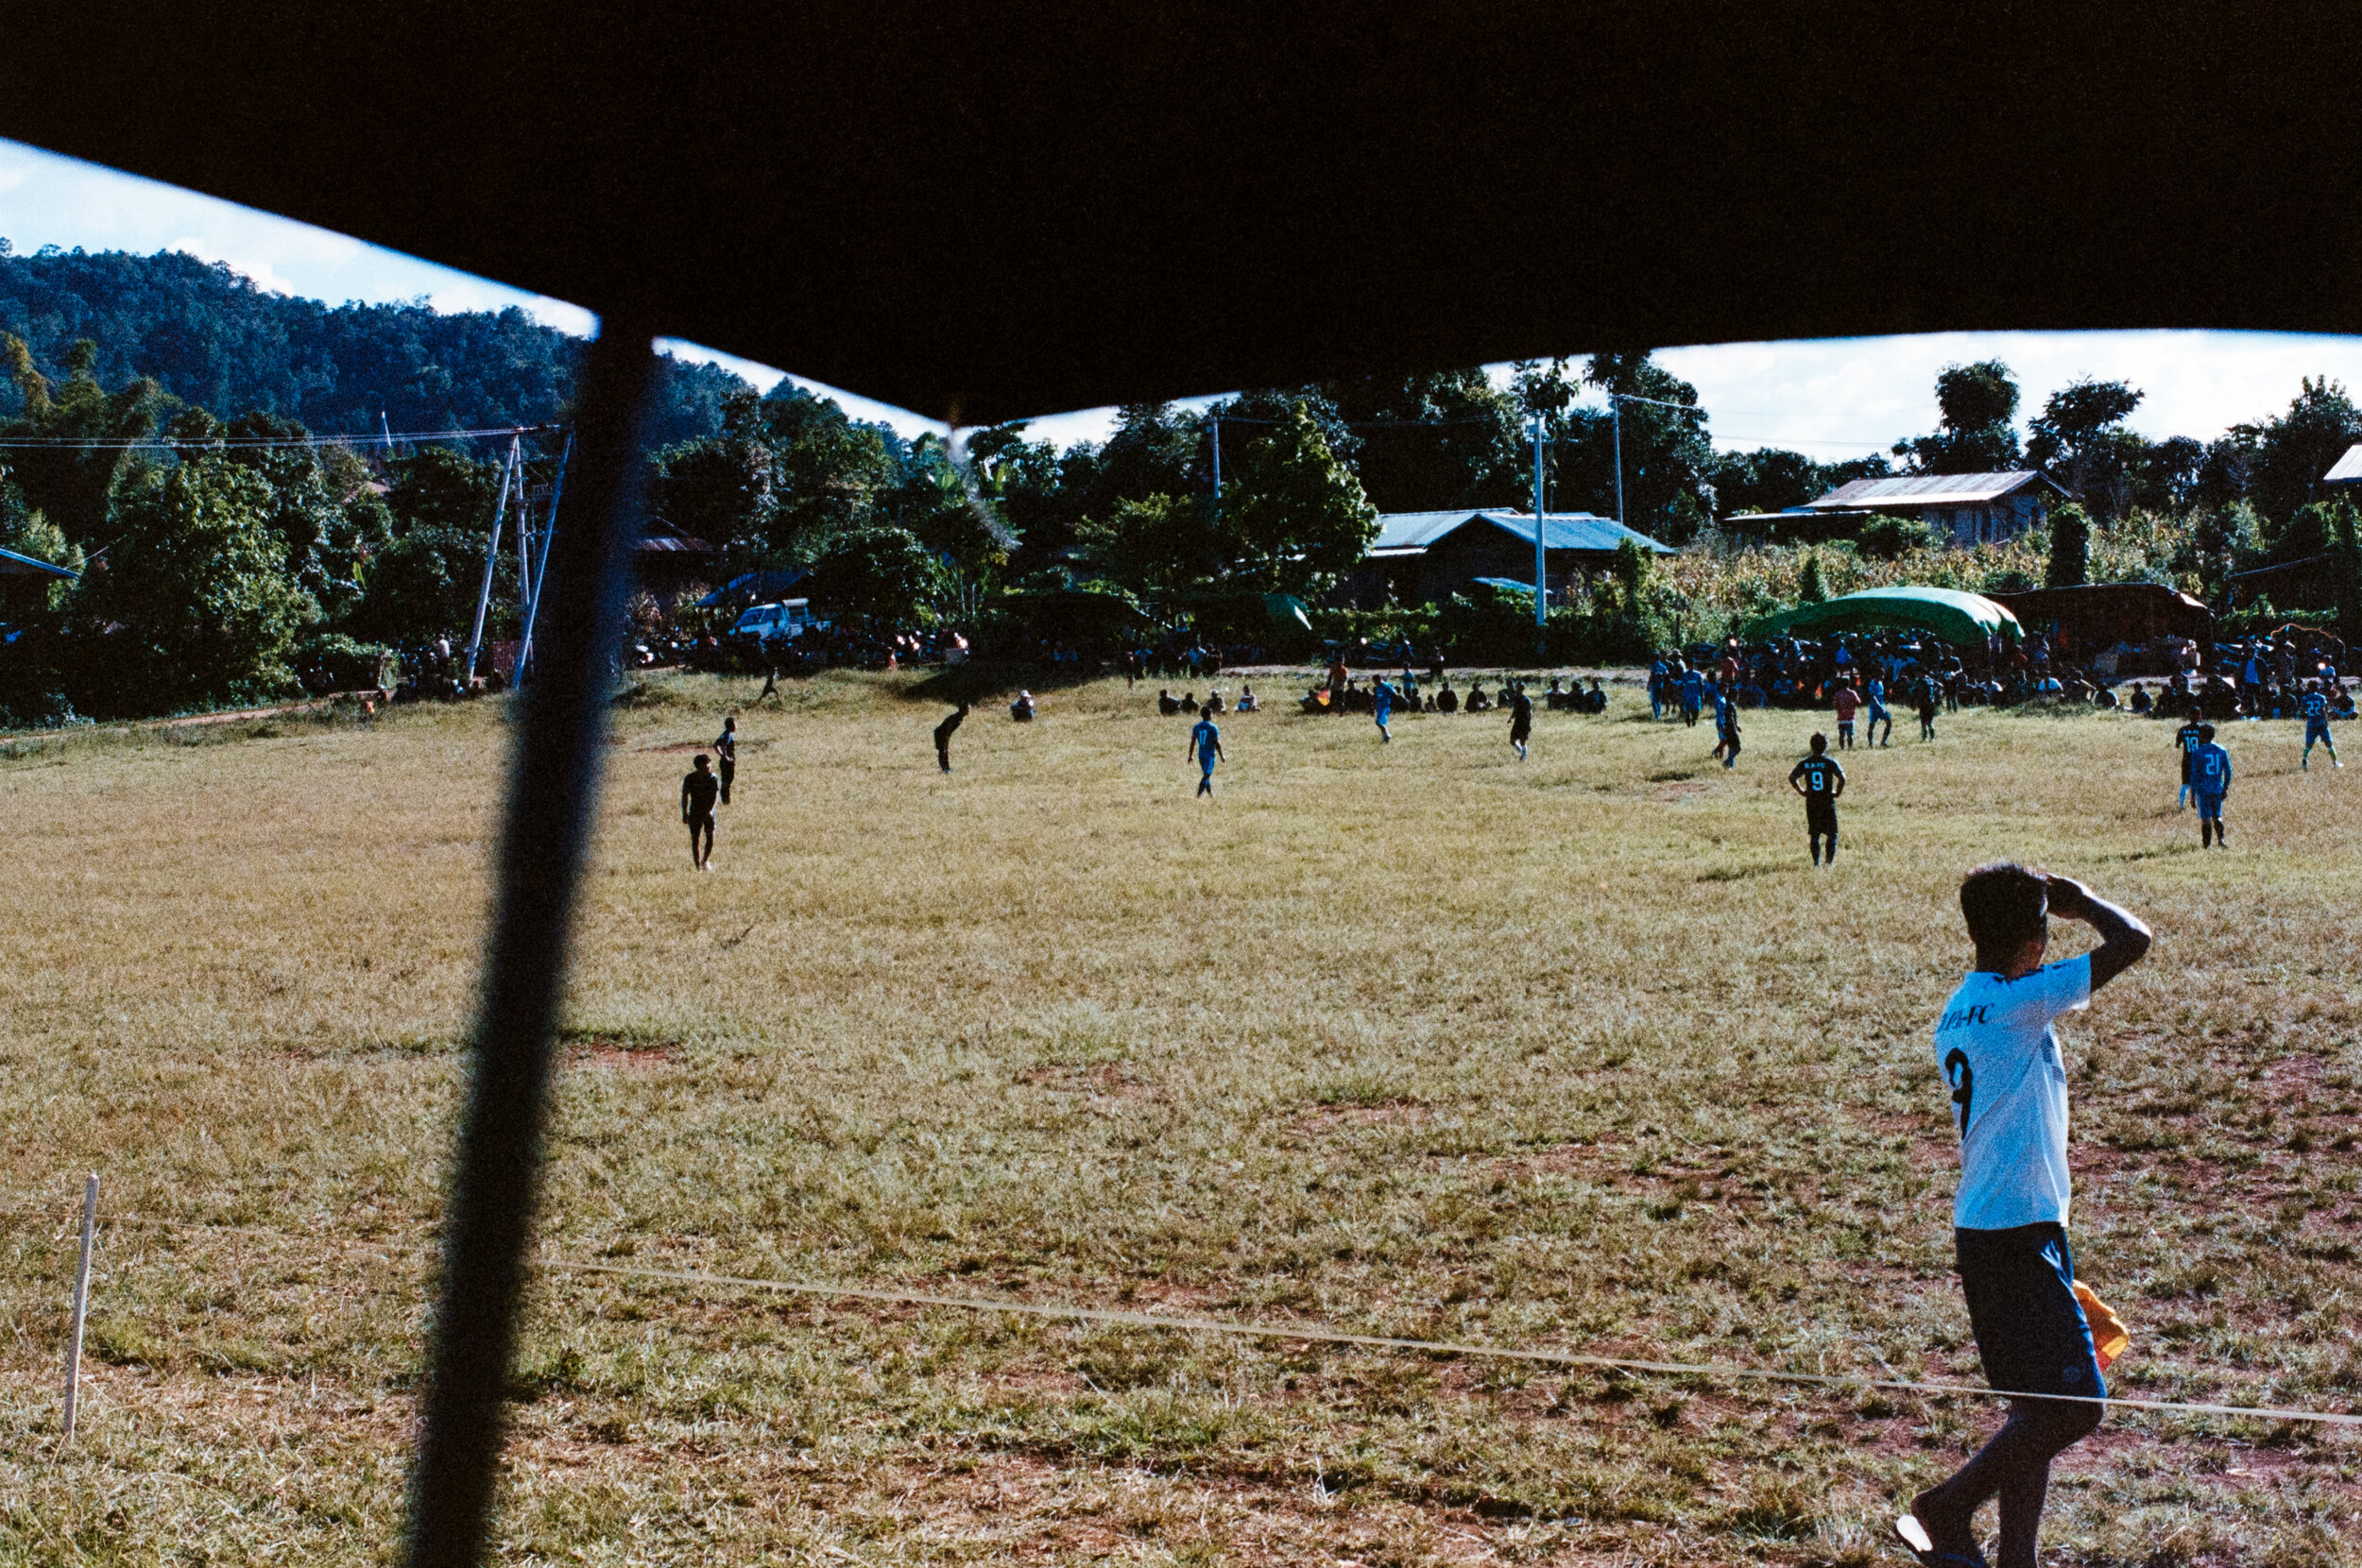  A annual soccer tournament is held among the villages in Kayah state. Spectators hiding under umbrellas because of the sun… A sun so strong it would burn the skin in an instant. It’s common this time of year…  One of the matches in Pan Pet. For some